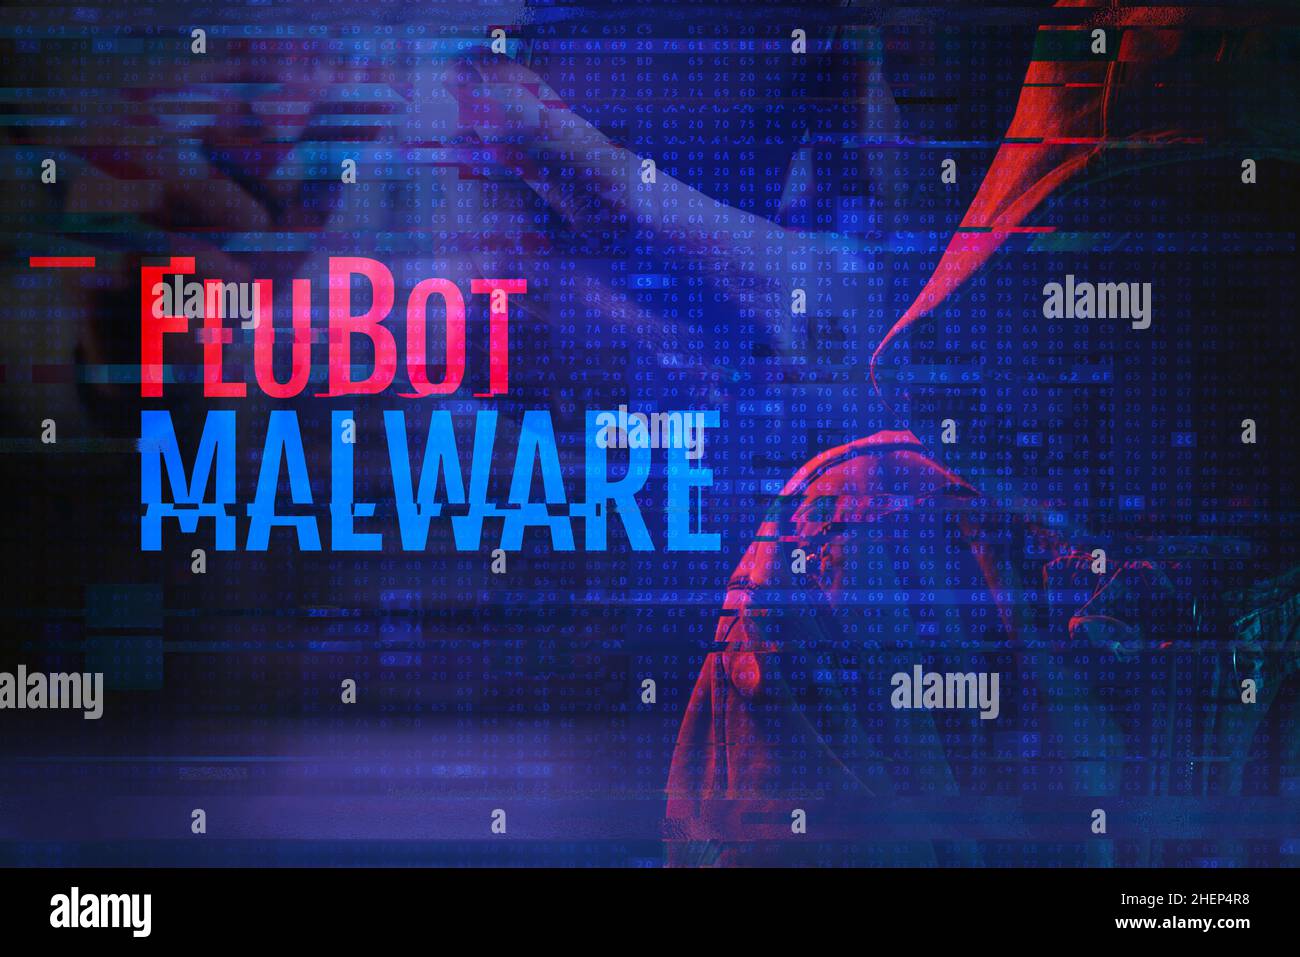 Flubot malware concept with hooded hacker and glitch effect. Flubot is malware distributed on mobile platforms. Stock Photo